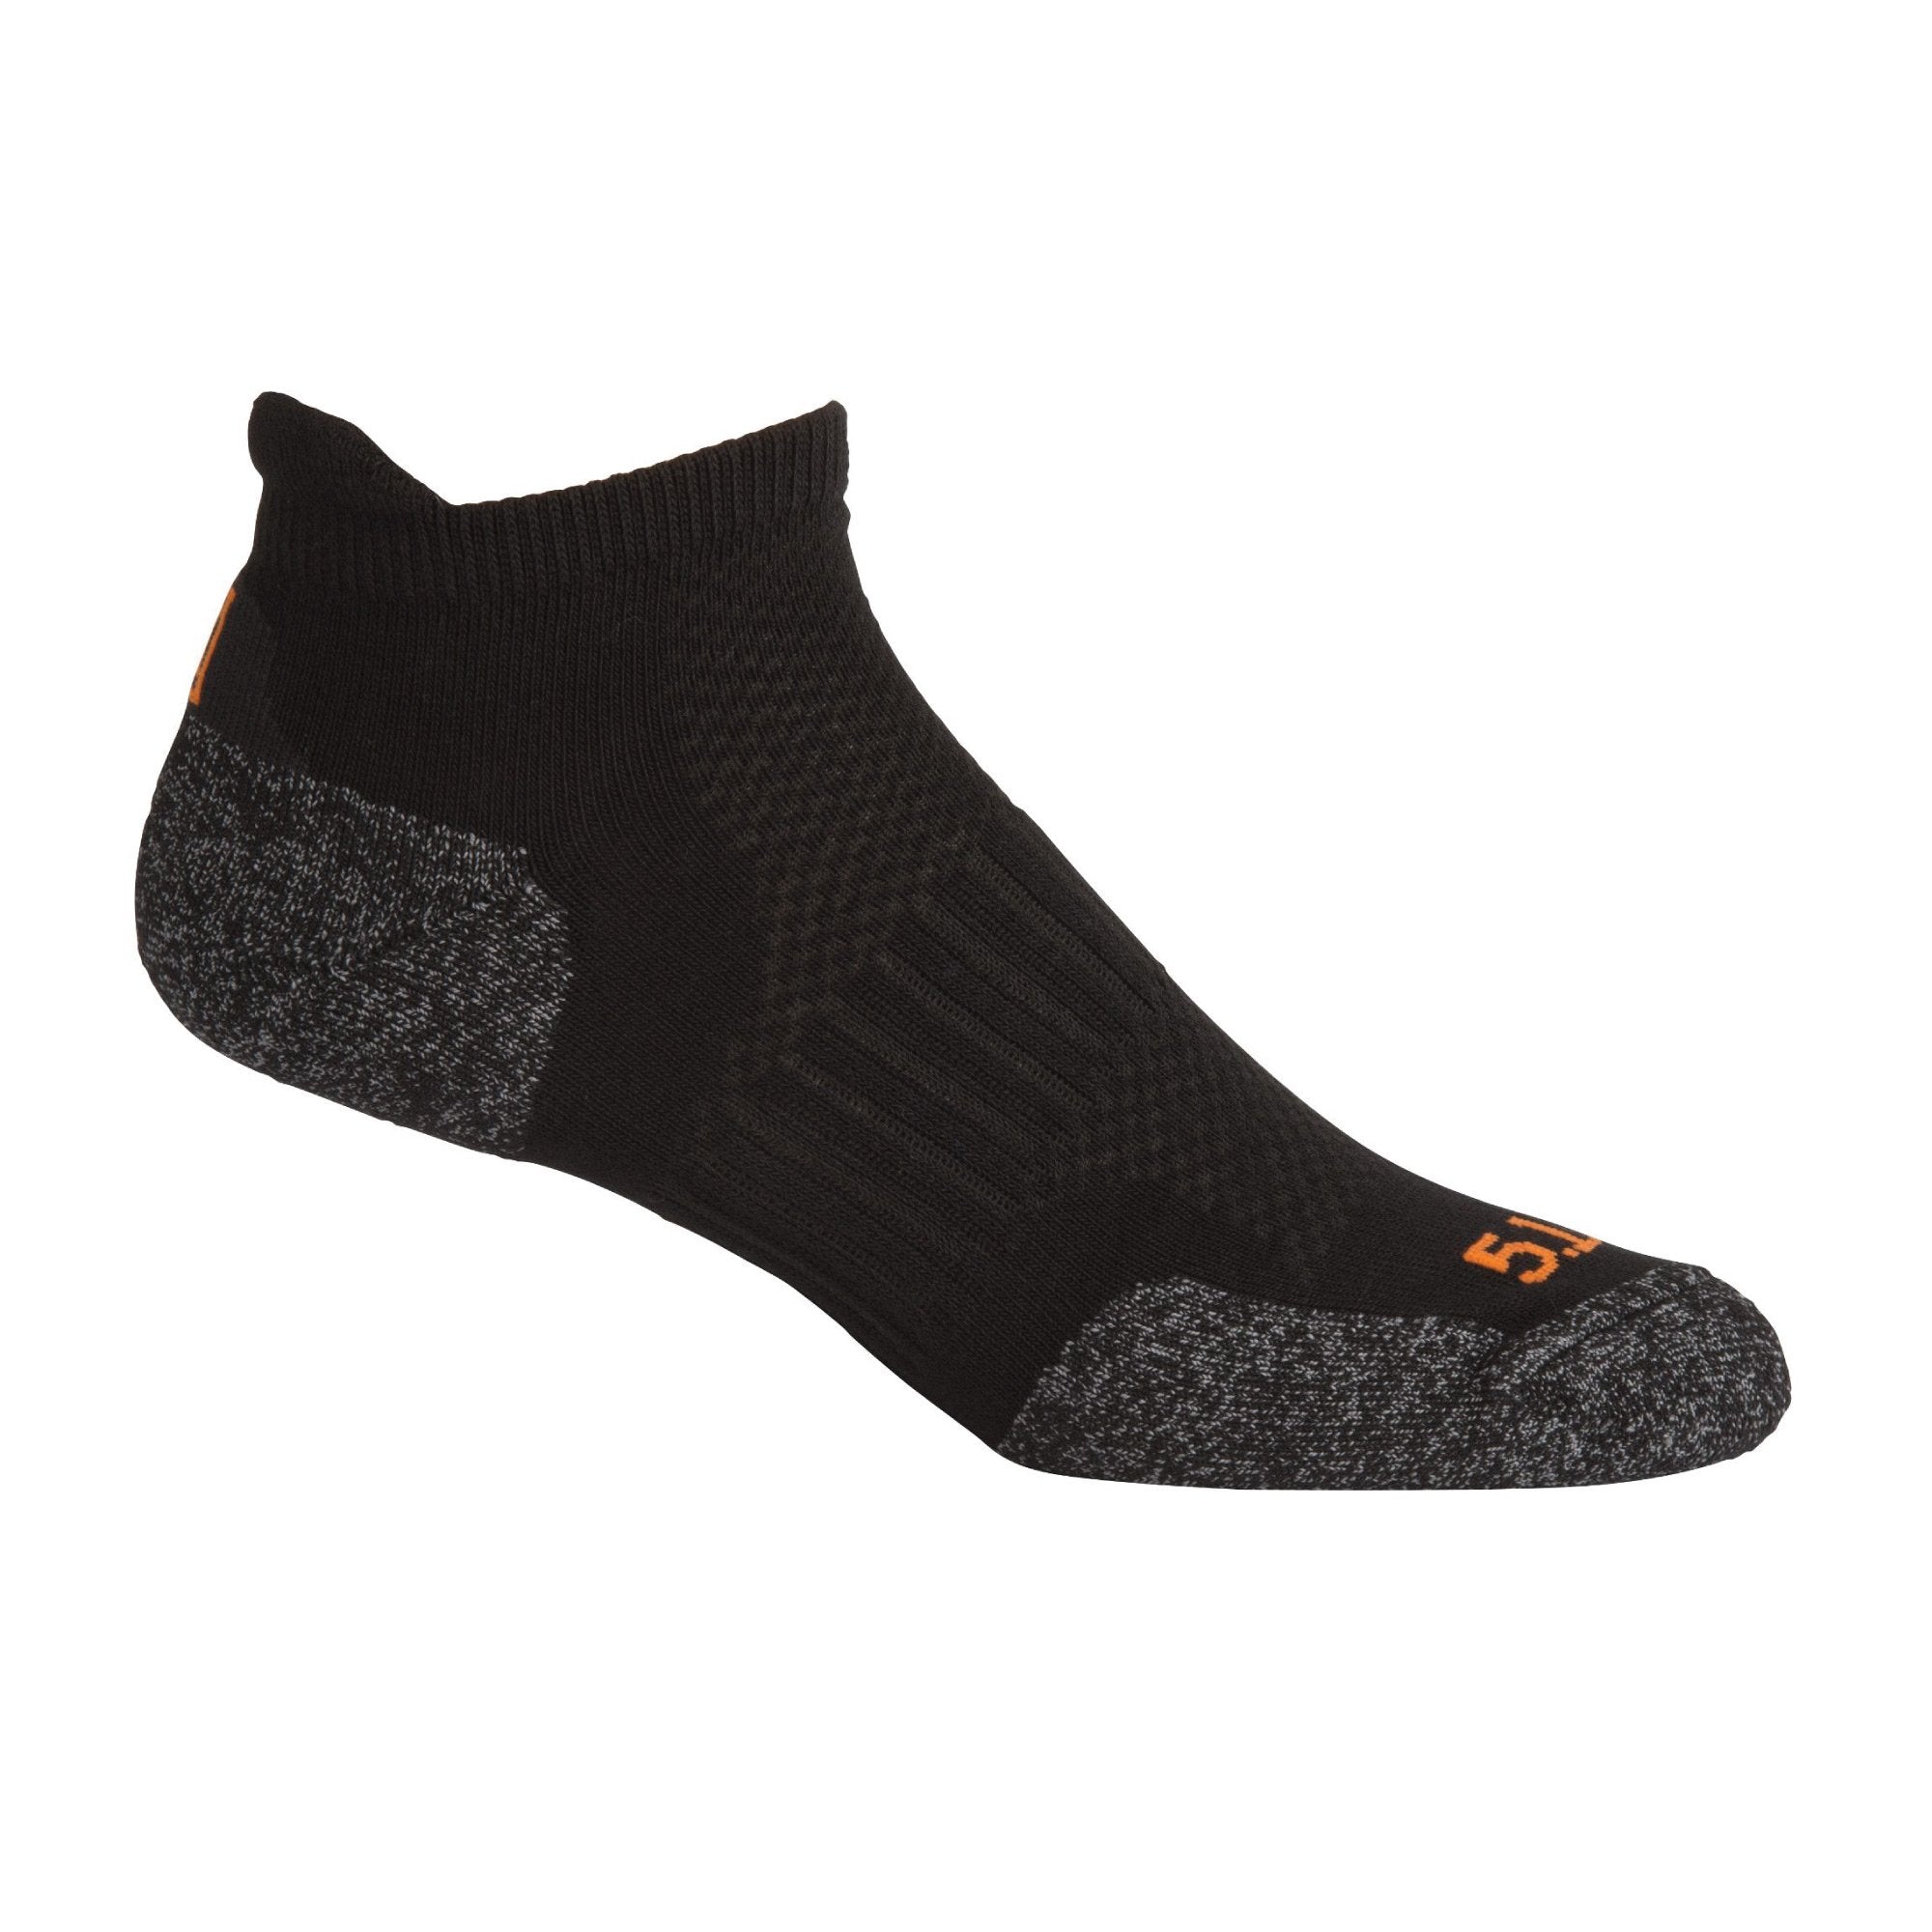 5.11 ABR Training Socks Footwear 5.11 Tactical White • Small Tactical Gear Supplier Tactical Distributors Australia